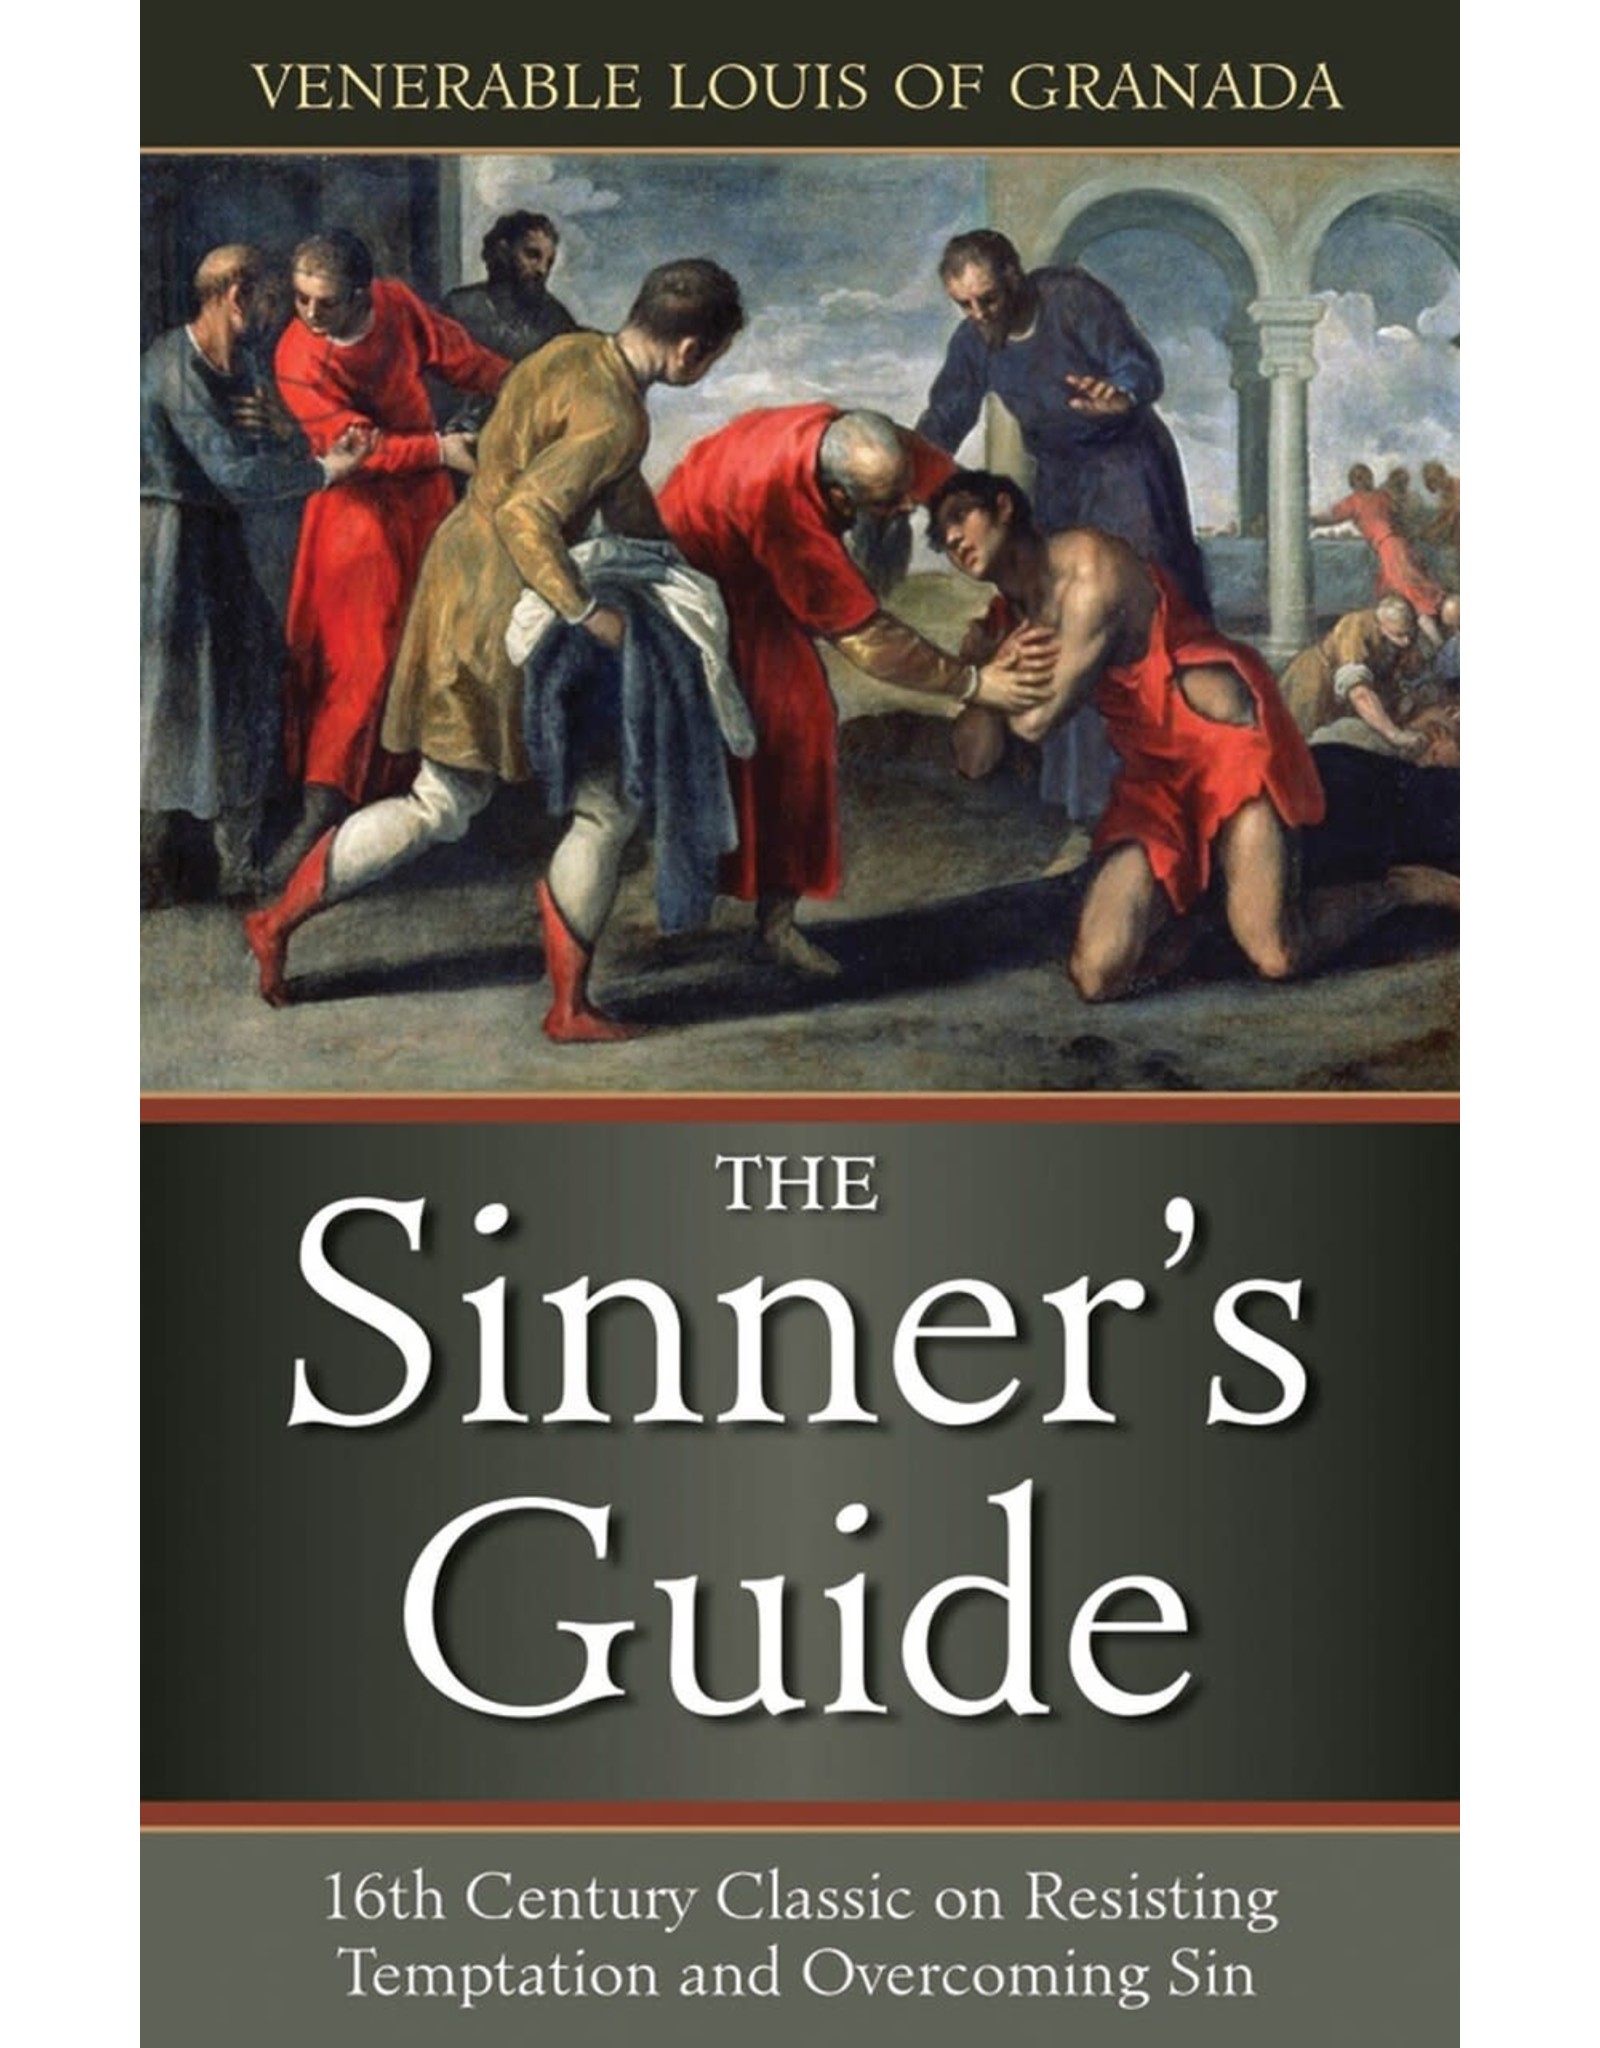 Tan Books The Sinner's Guide: The 16th Century Classic on Resisting Temptation and Overcoming Sin by Venerable Louis of Granada (Paperback)